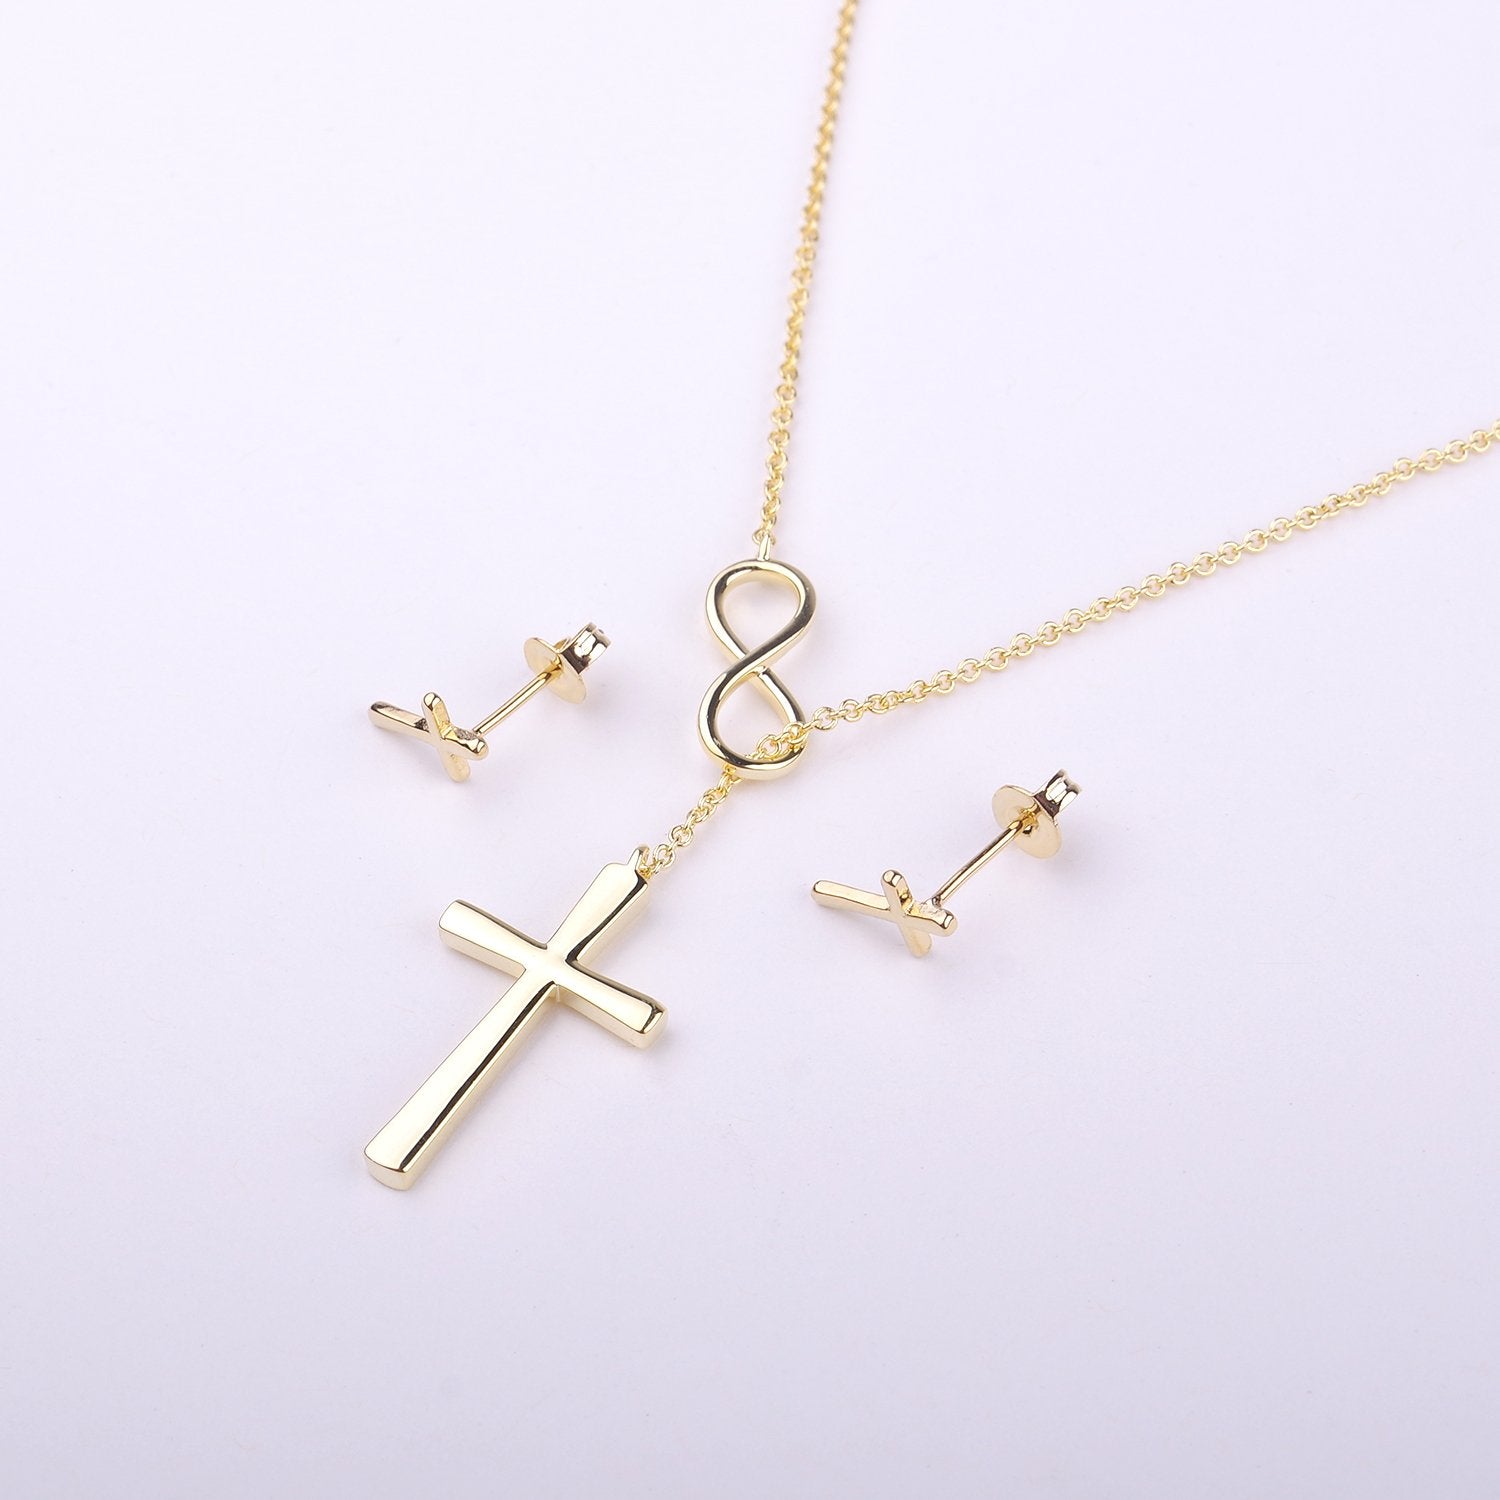  boxed-gifts Men's Gold Crosses Religious Red Novelty